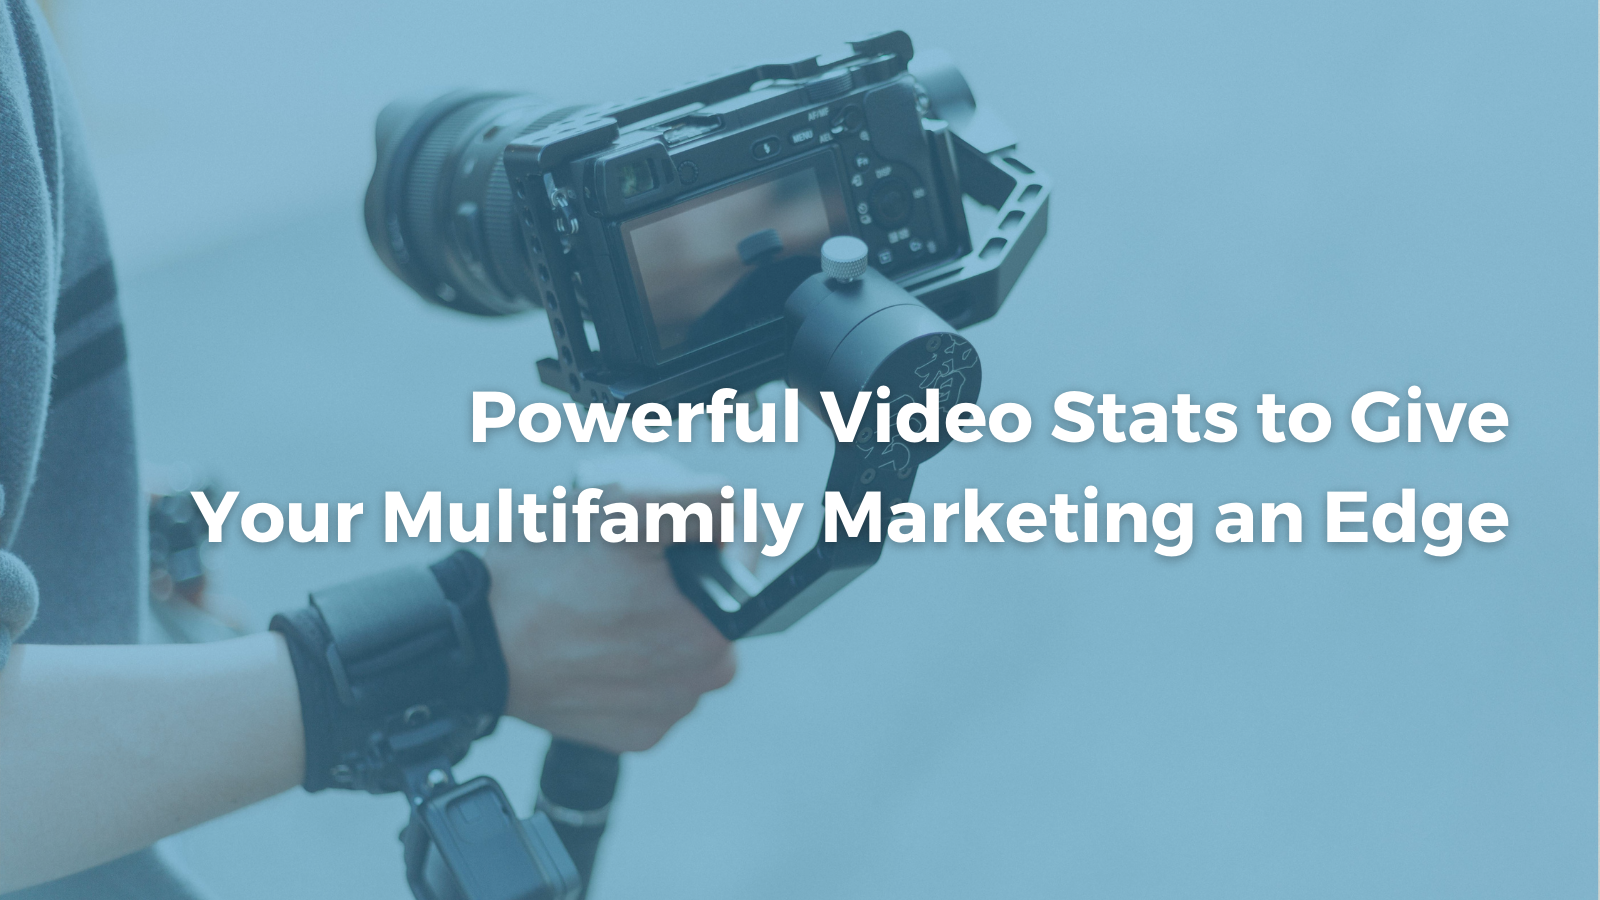 Powerful Video Stats to Give Your Multifamily Marketing an Edge